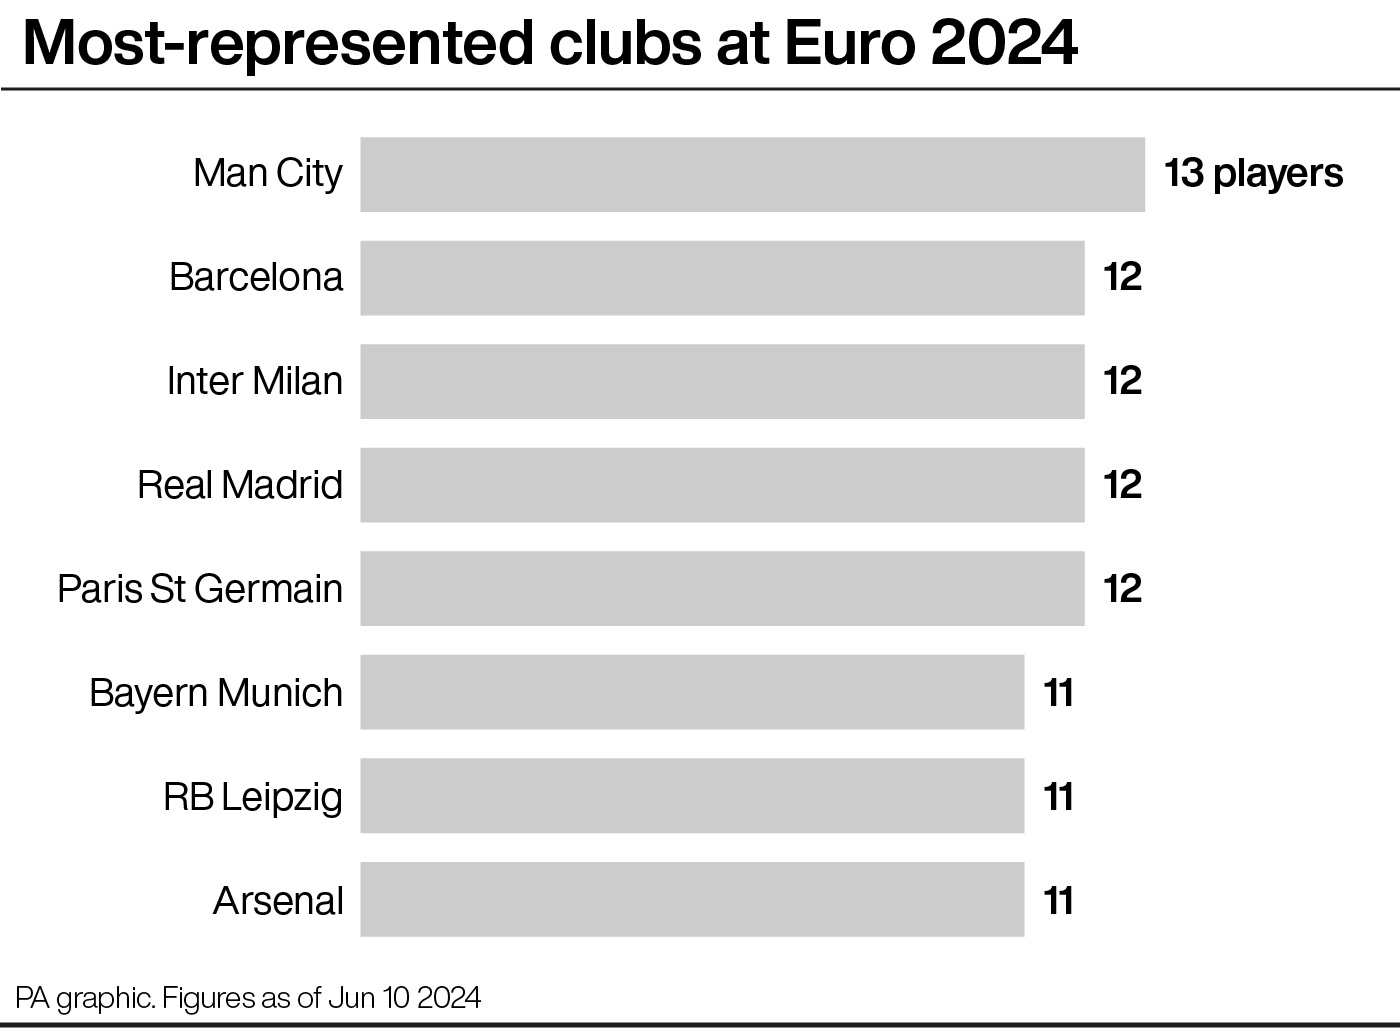 Bar chart of the most represented clubs at Euro 2024: Manchester City 13 players; Barcelona, Inter Milan, Real Madrid and Paris St Germain 12 each; Bayern Munich, RB Leipzig and Arsenal 11 each